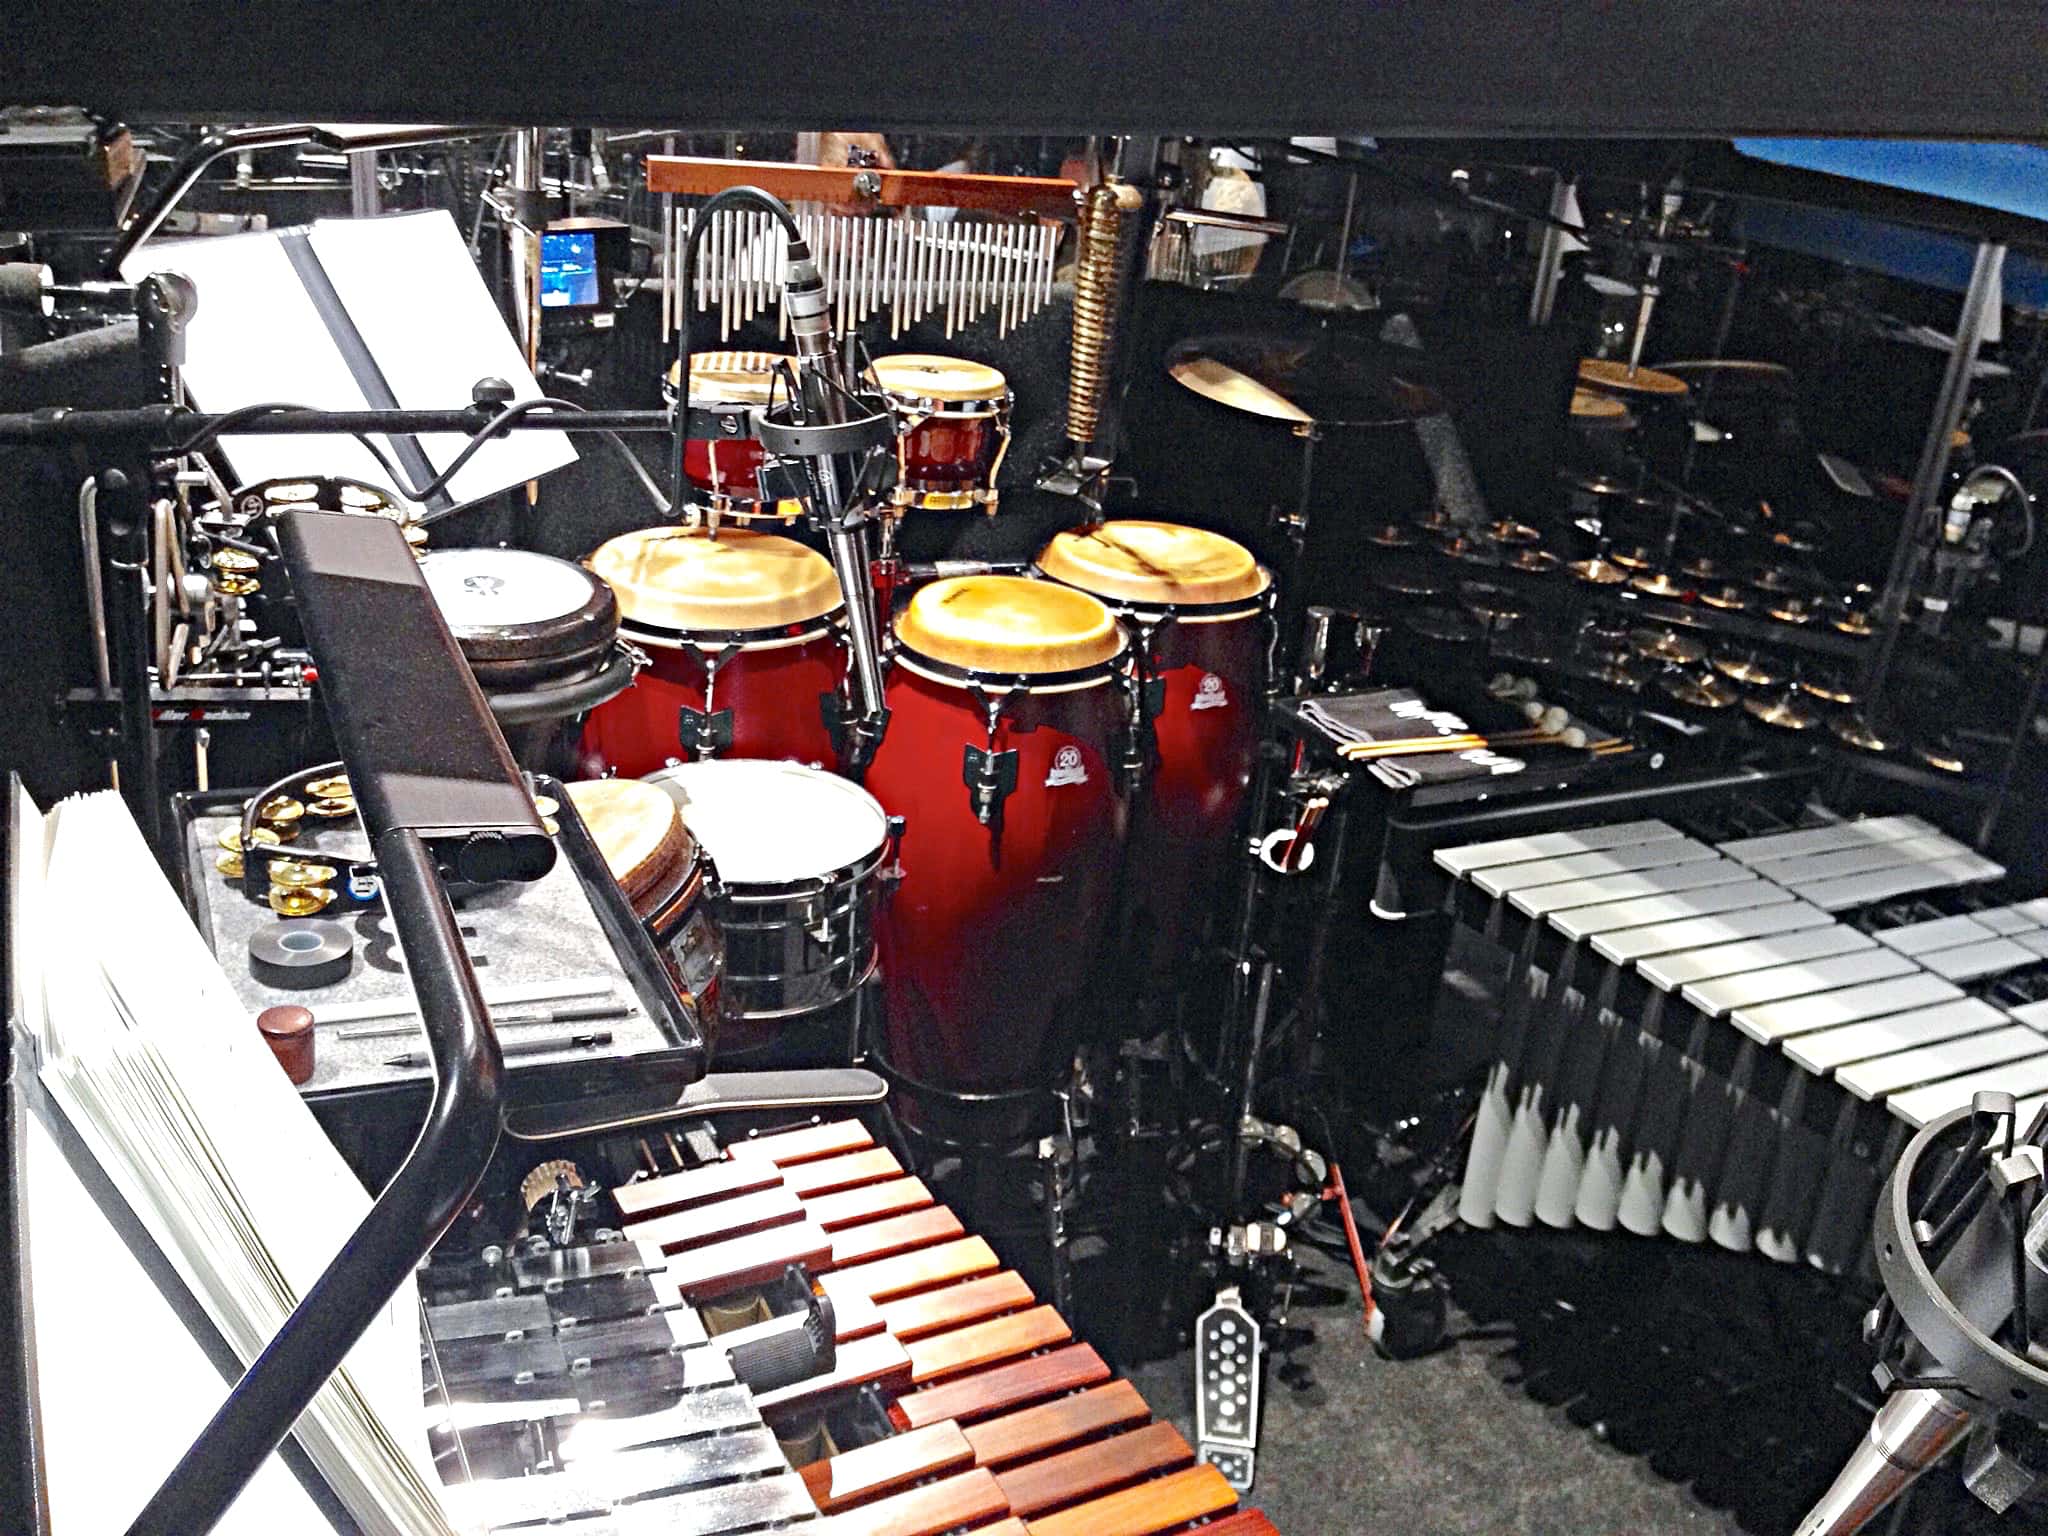 Shan Chana's percussion setup for Aladdin at the Prince of Wales Theatre in London's West End.